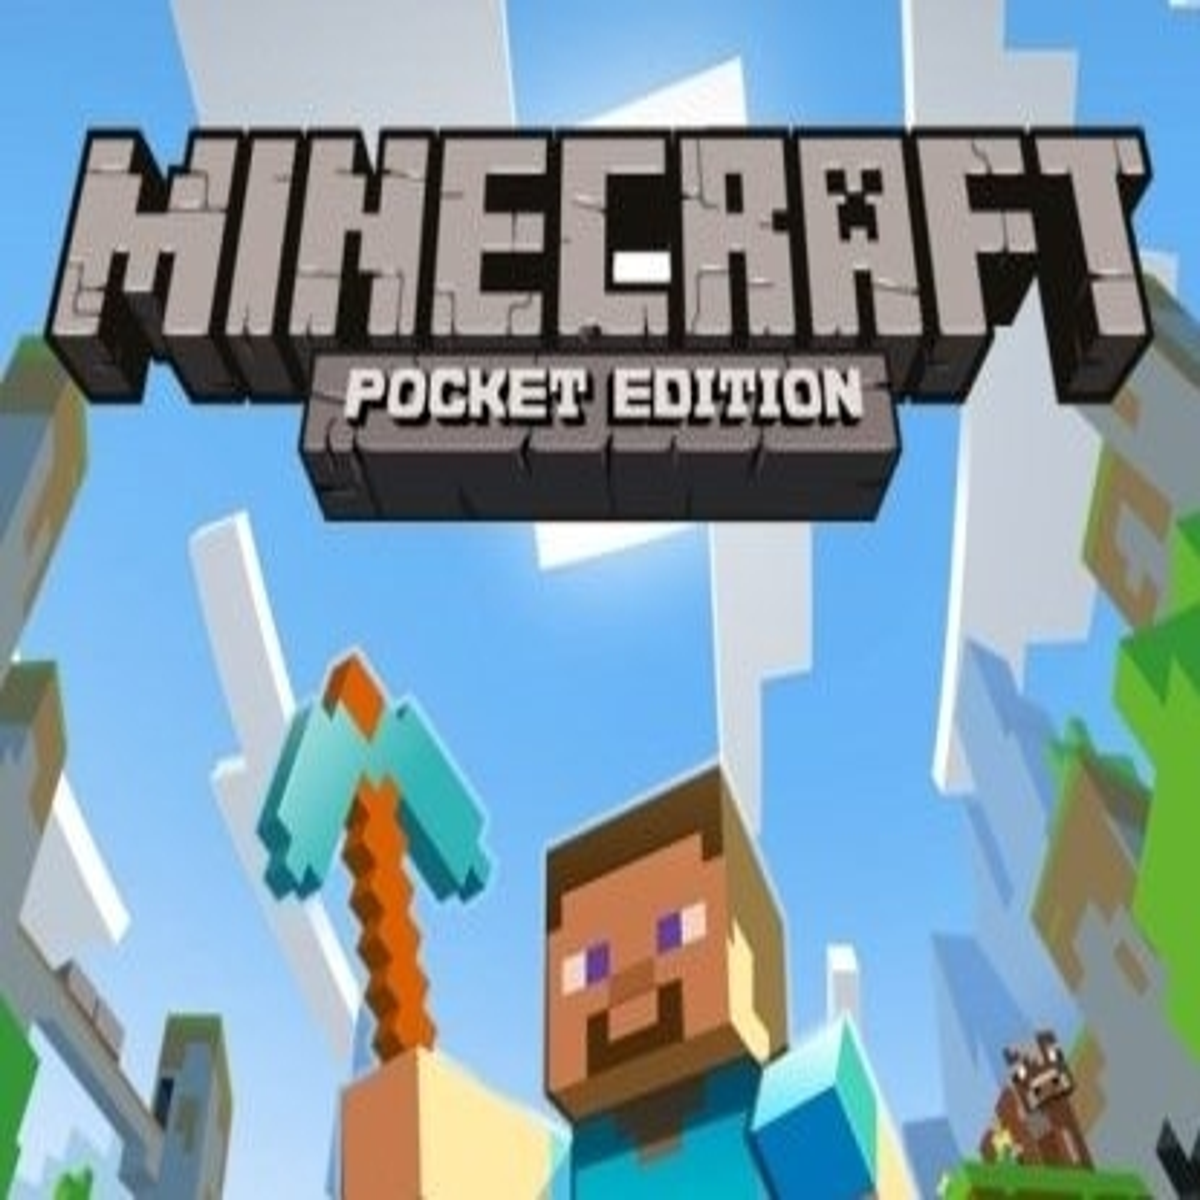 Minecraft Pocket Edition is a mobile version of Minecraft, which